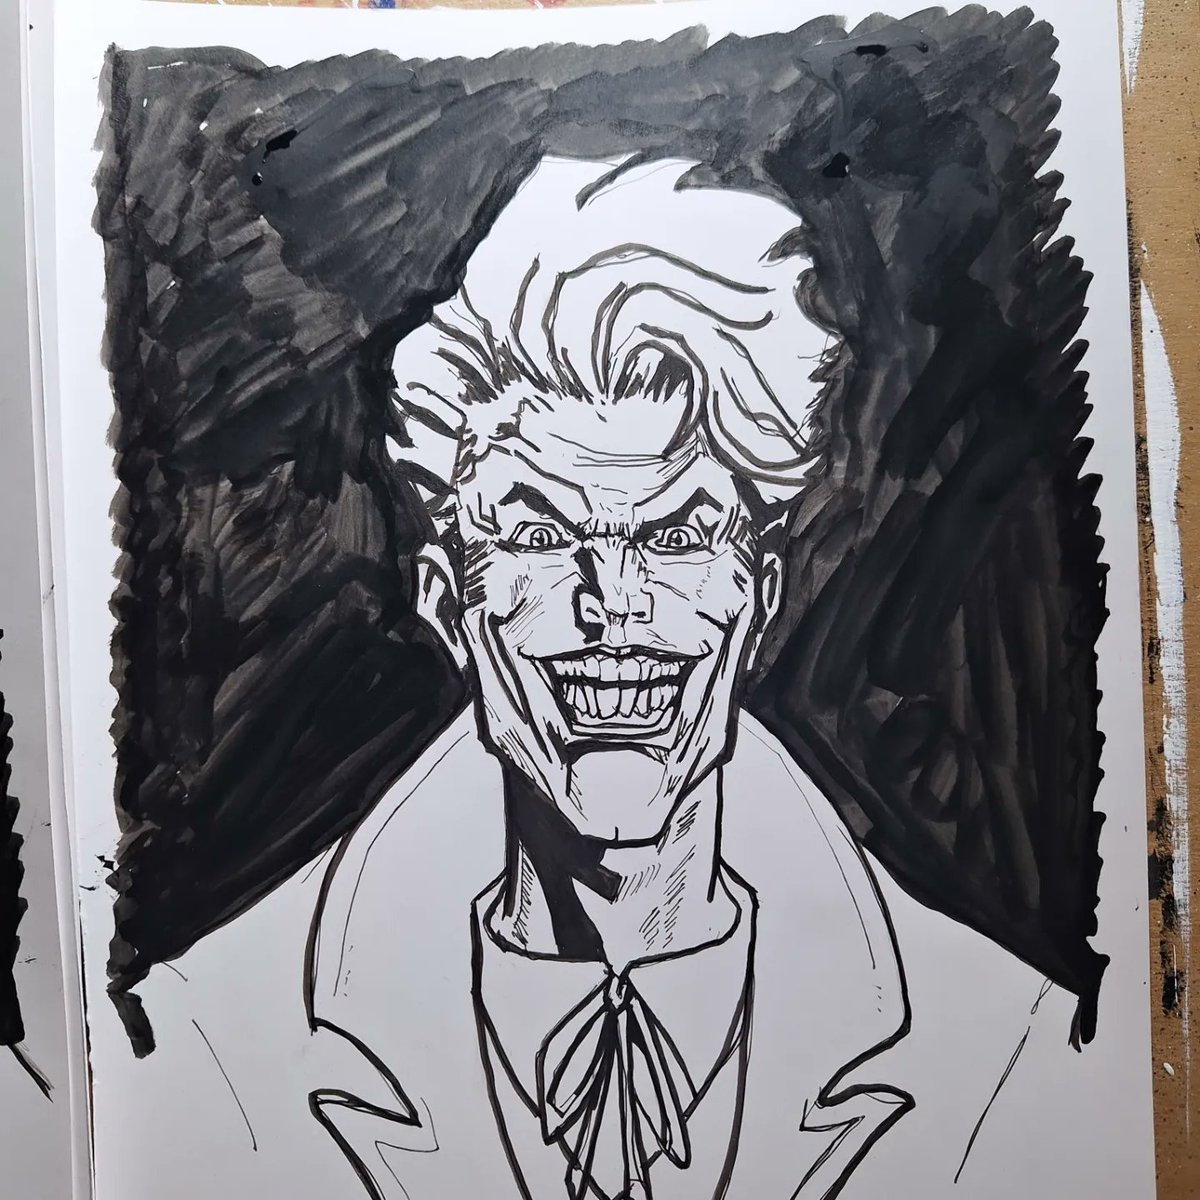 Another #joker for a commission 8x11! by yours truly. #drawing #comicart #illustration #comicartwork #comicoftheday #comicillustration #comiccover #comicbookgeek #batman #dccomics #comics